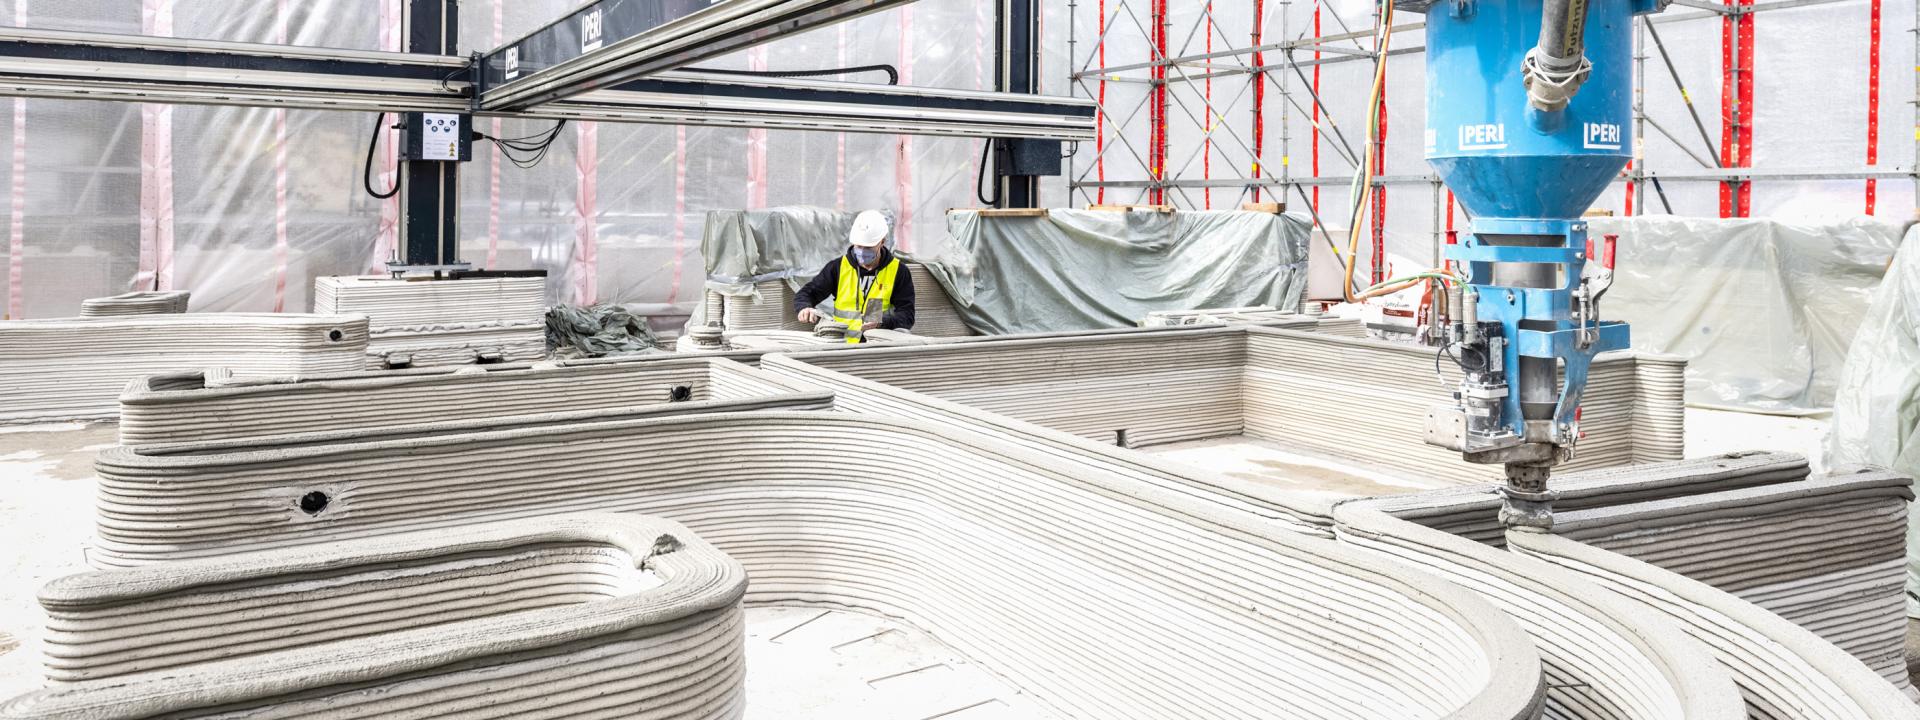 HeidelbergCement supplies material for Germany’s first 3D printed residential building